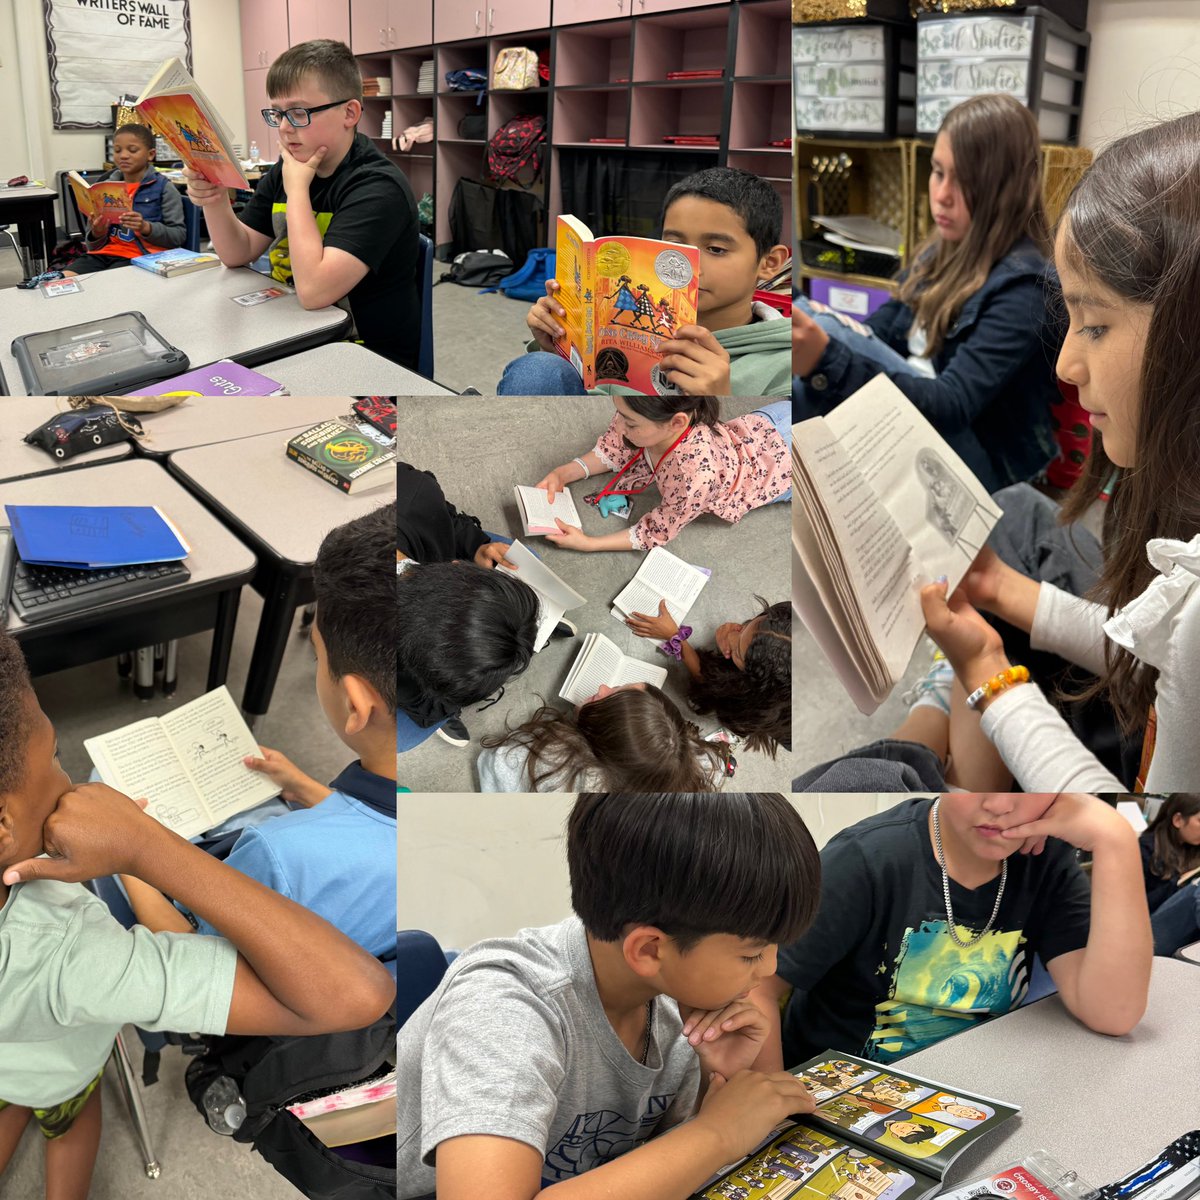 🤍Our new book clubs are off to a great start! 🤍 I’ll post more of the individual group activities that we align with their book clubs throughout the week. @CrosbyISD @BarrettElemCISD @CrosbyISDReads